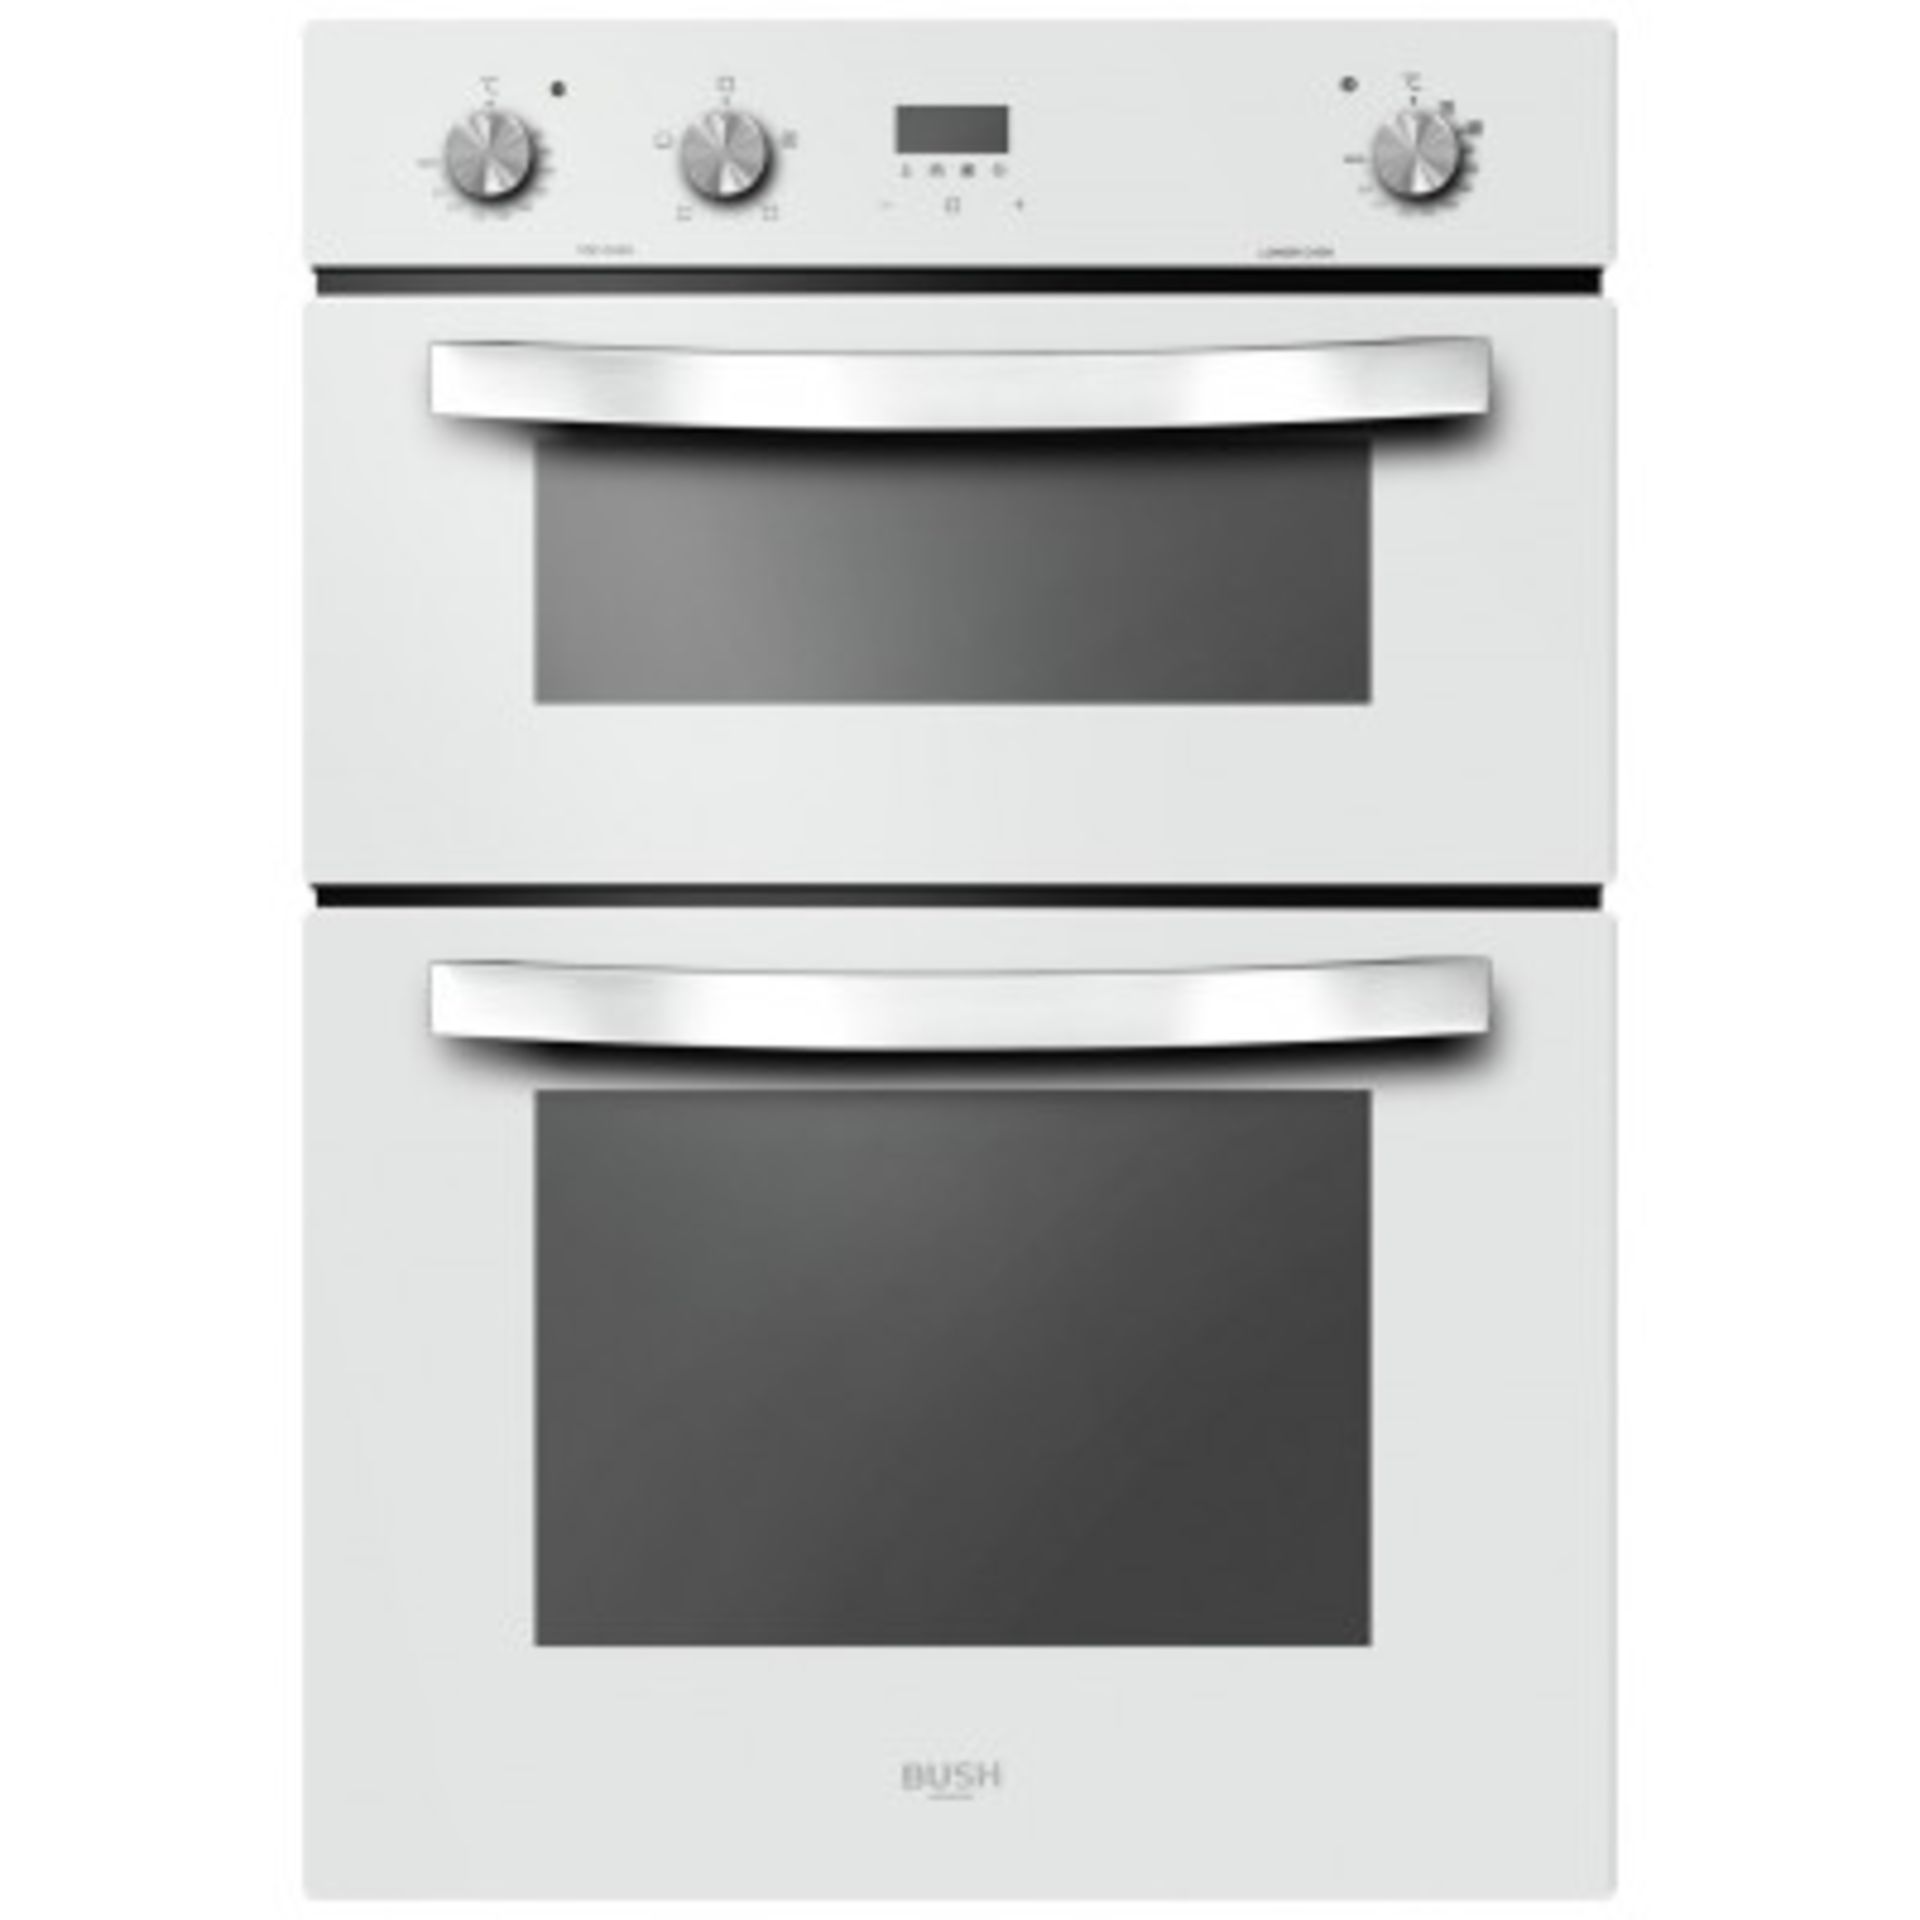 + VAT Grade B Bush LSBWDFO Built In Electric Oven - Main Oven Has 57 Litre Capacity - 2nd Oven Has